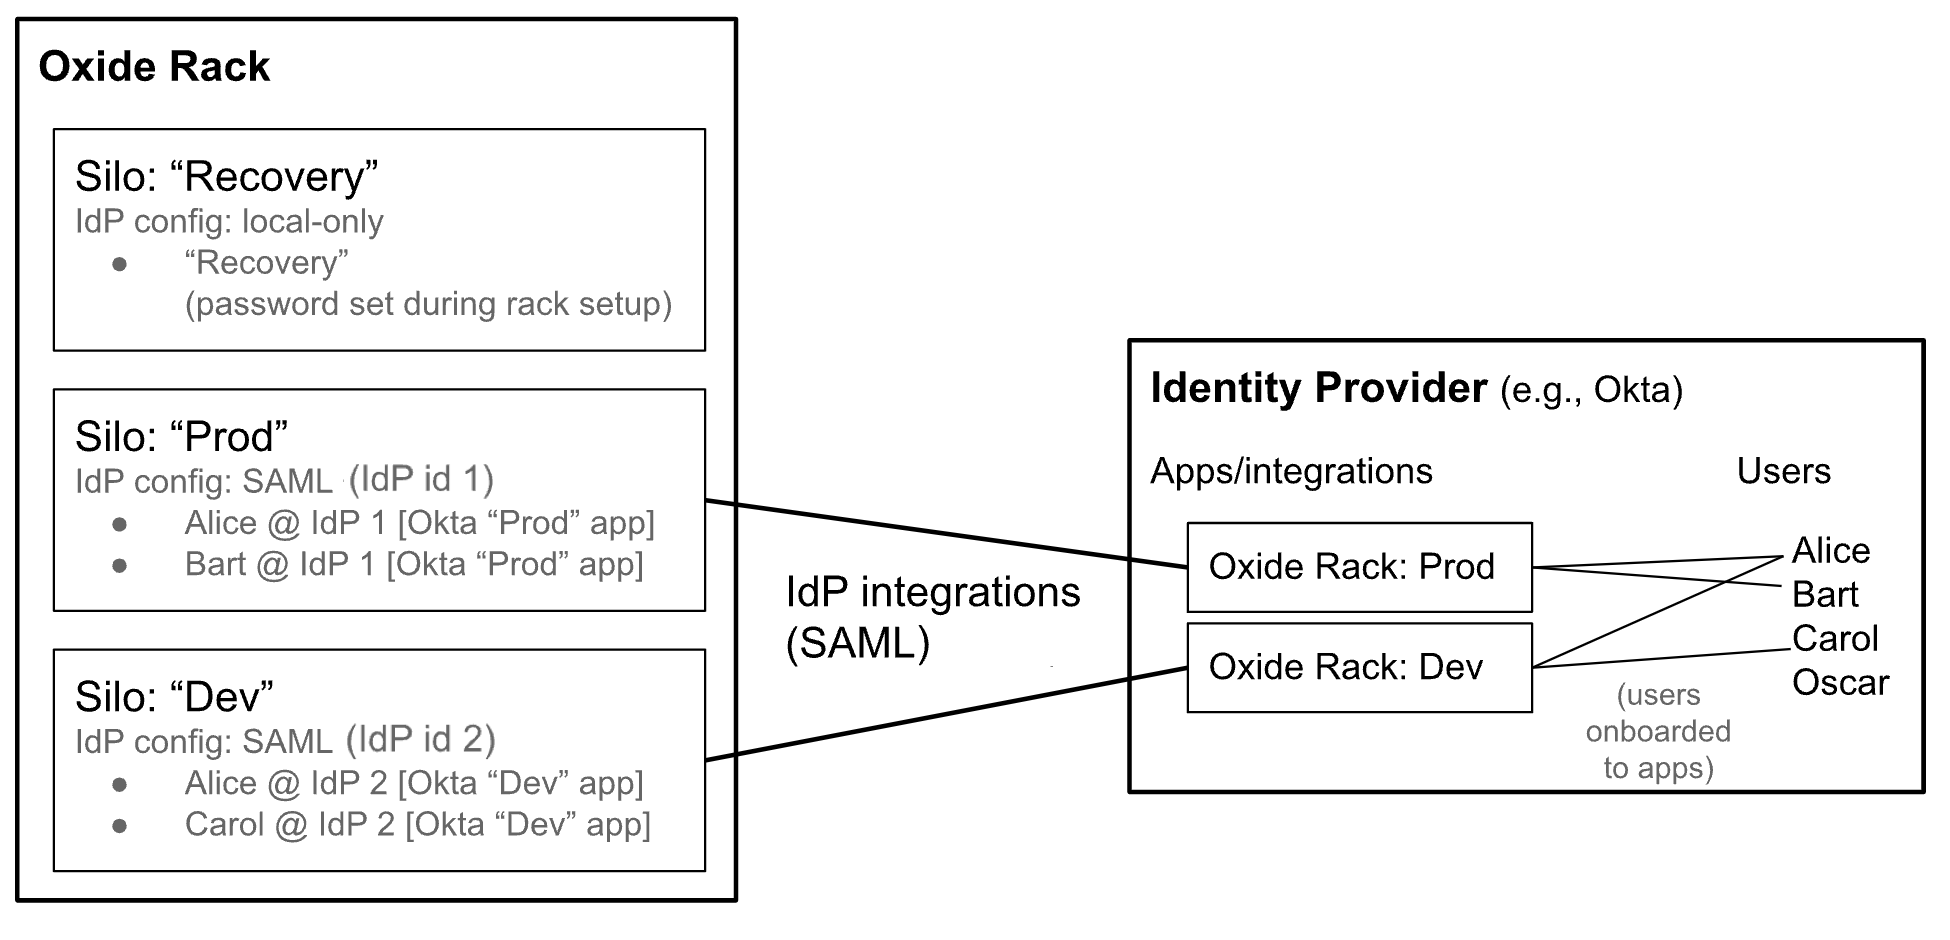 Silos and Identity Providers